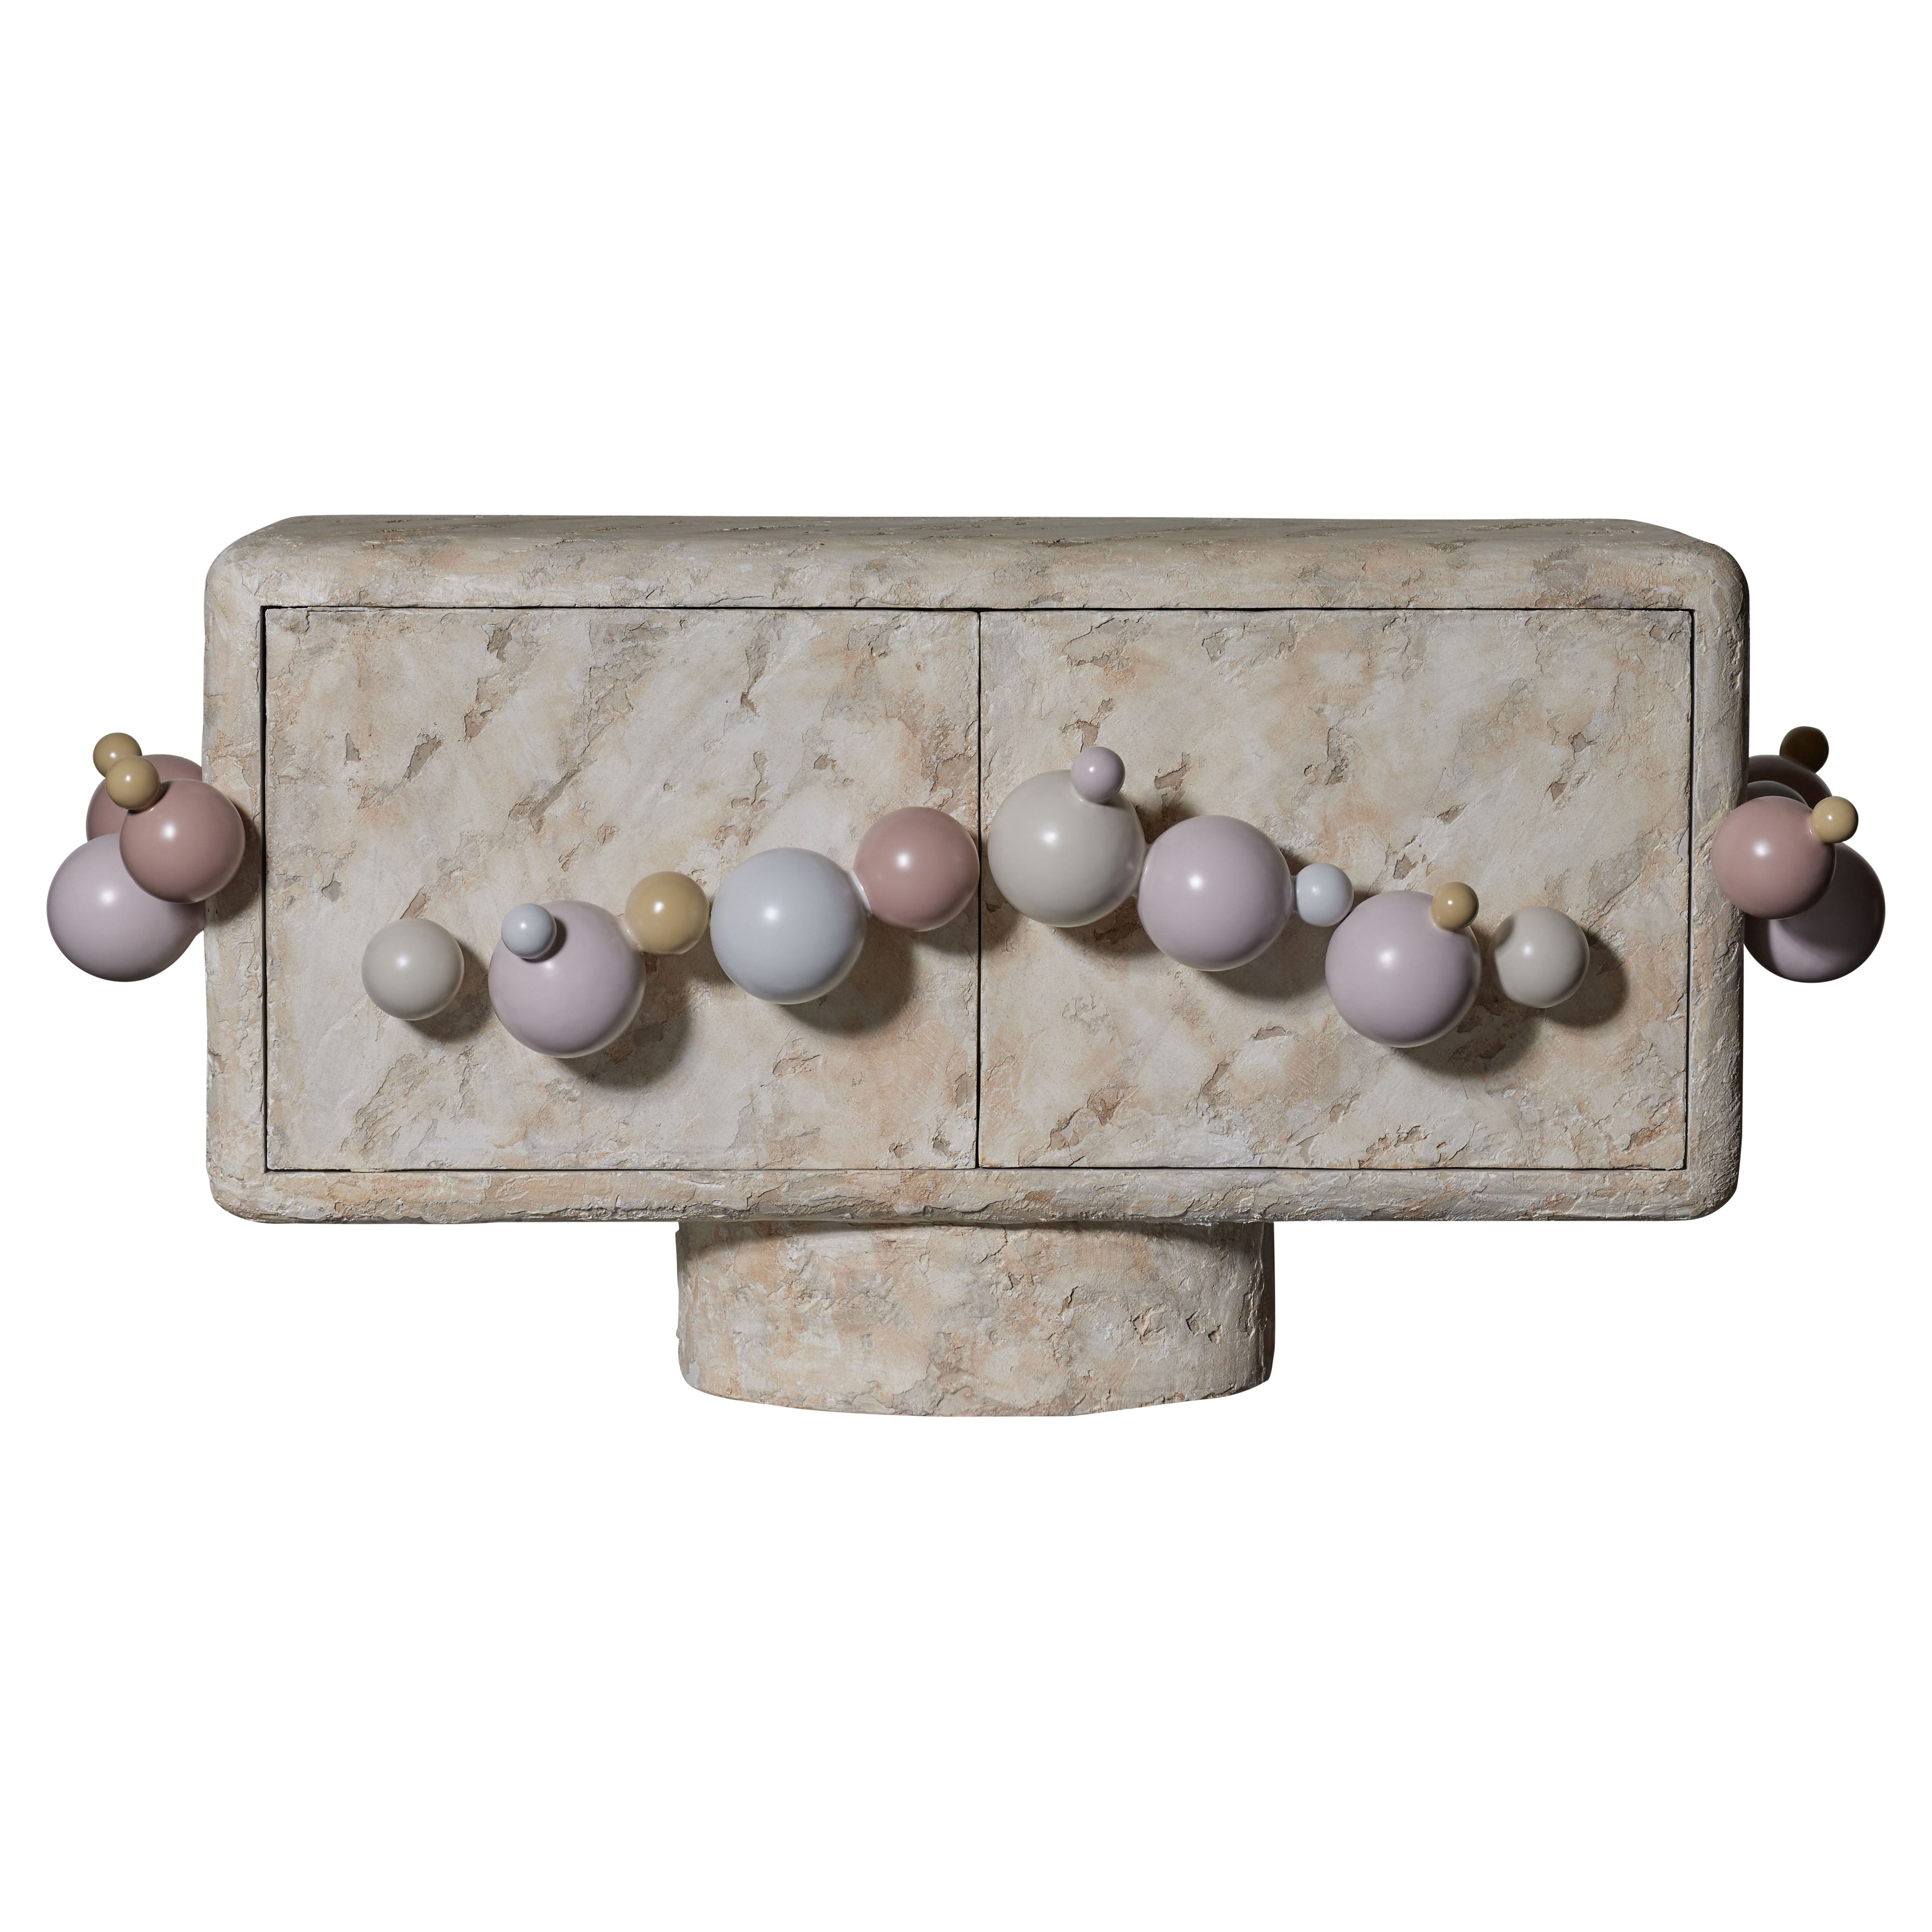 "Bubbles" sideboard by Nicolet for Galerie Glustin